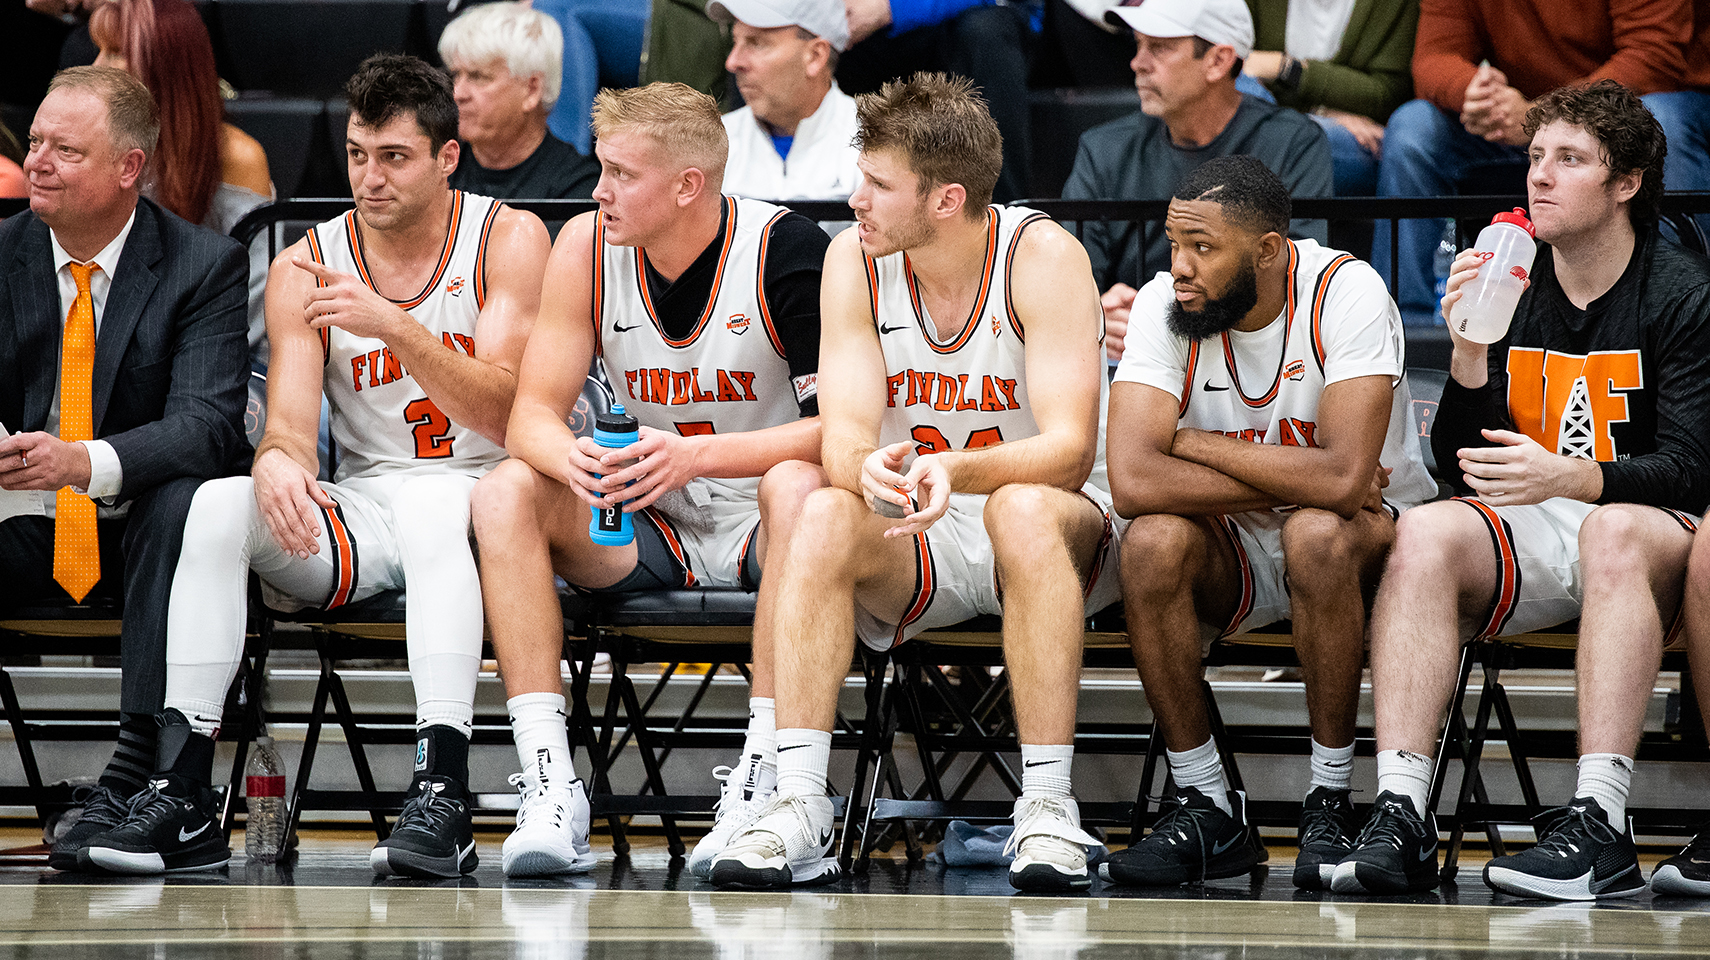 men's basketball players sitting on the bench